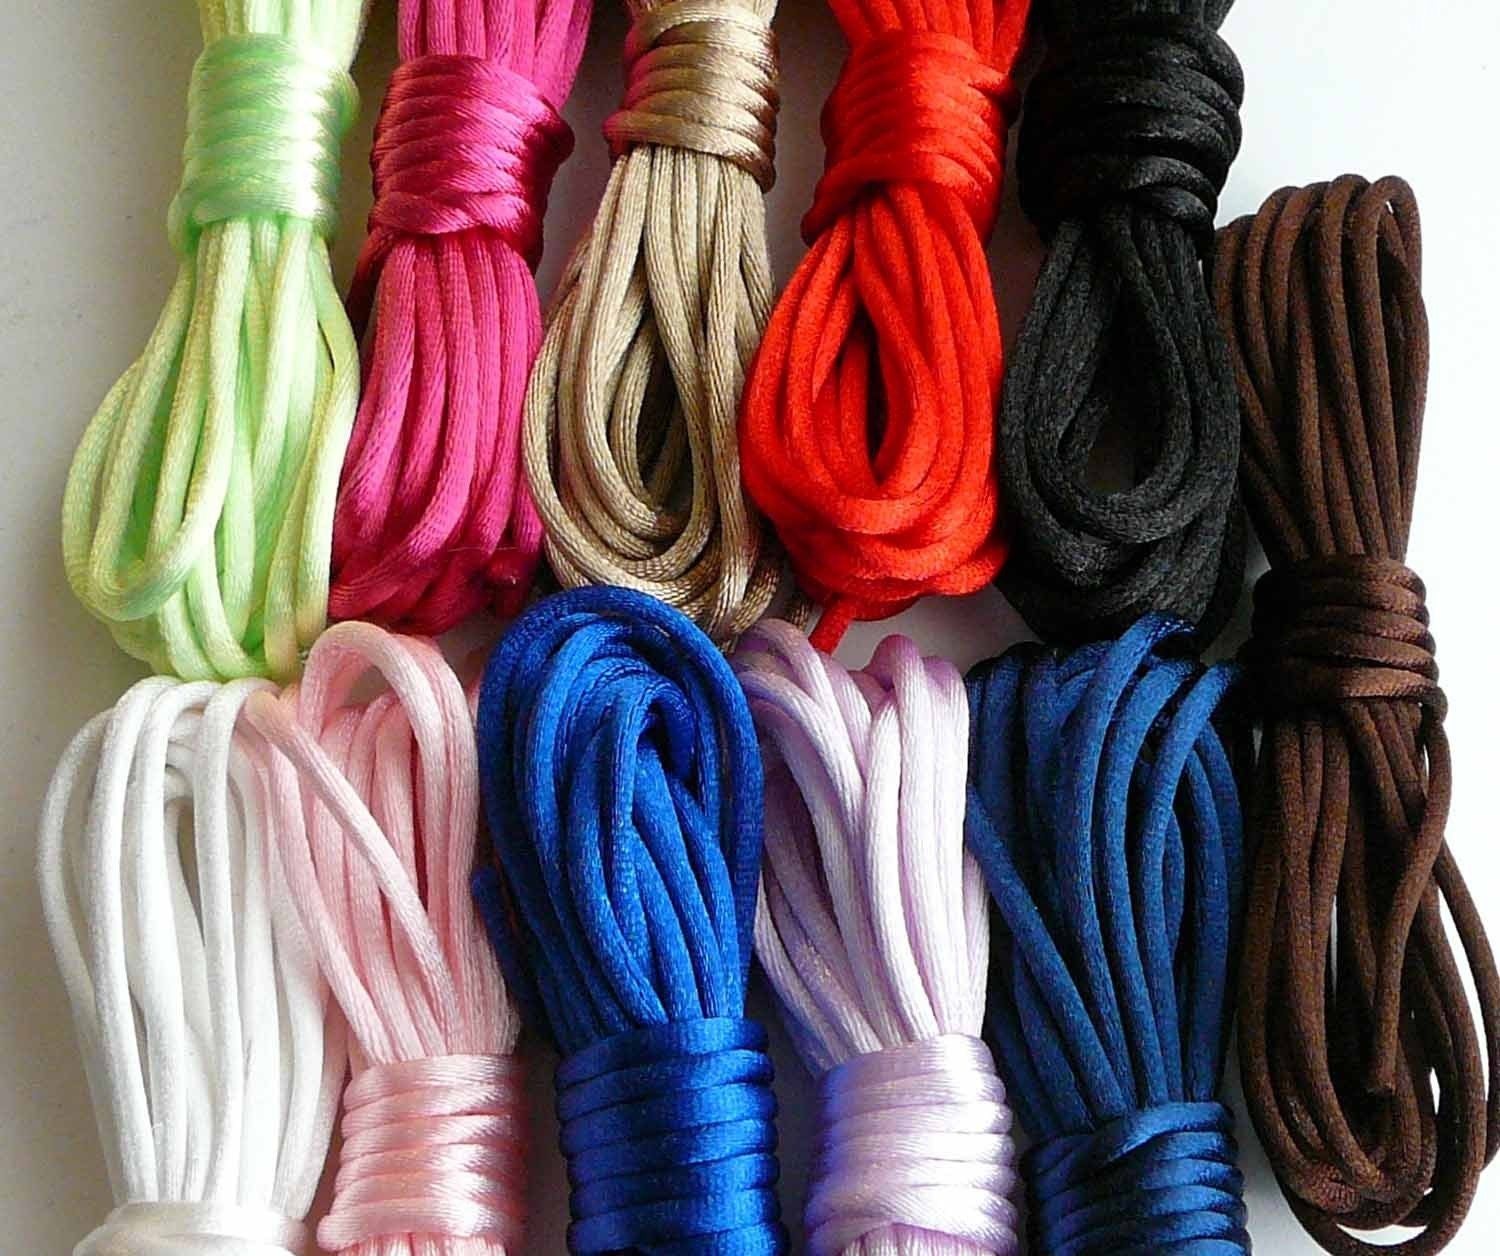 20 - Thick Rattail Necklace Cords - Any length - 8 Colors - For Lg Pendants, Pandora Beads or Lg Bails - Handmade in USA